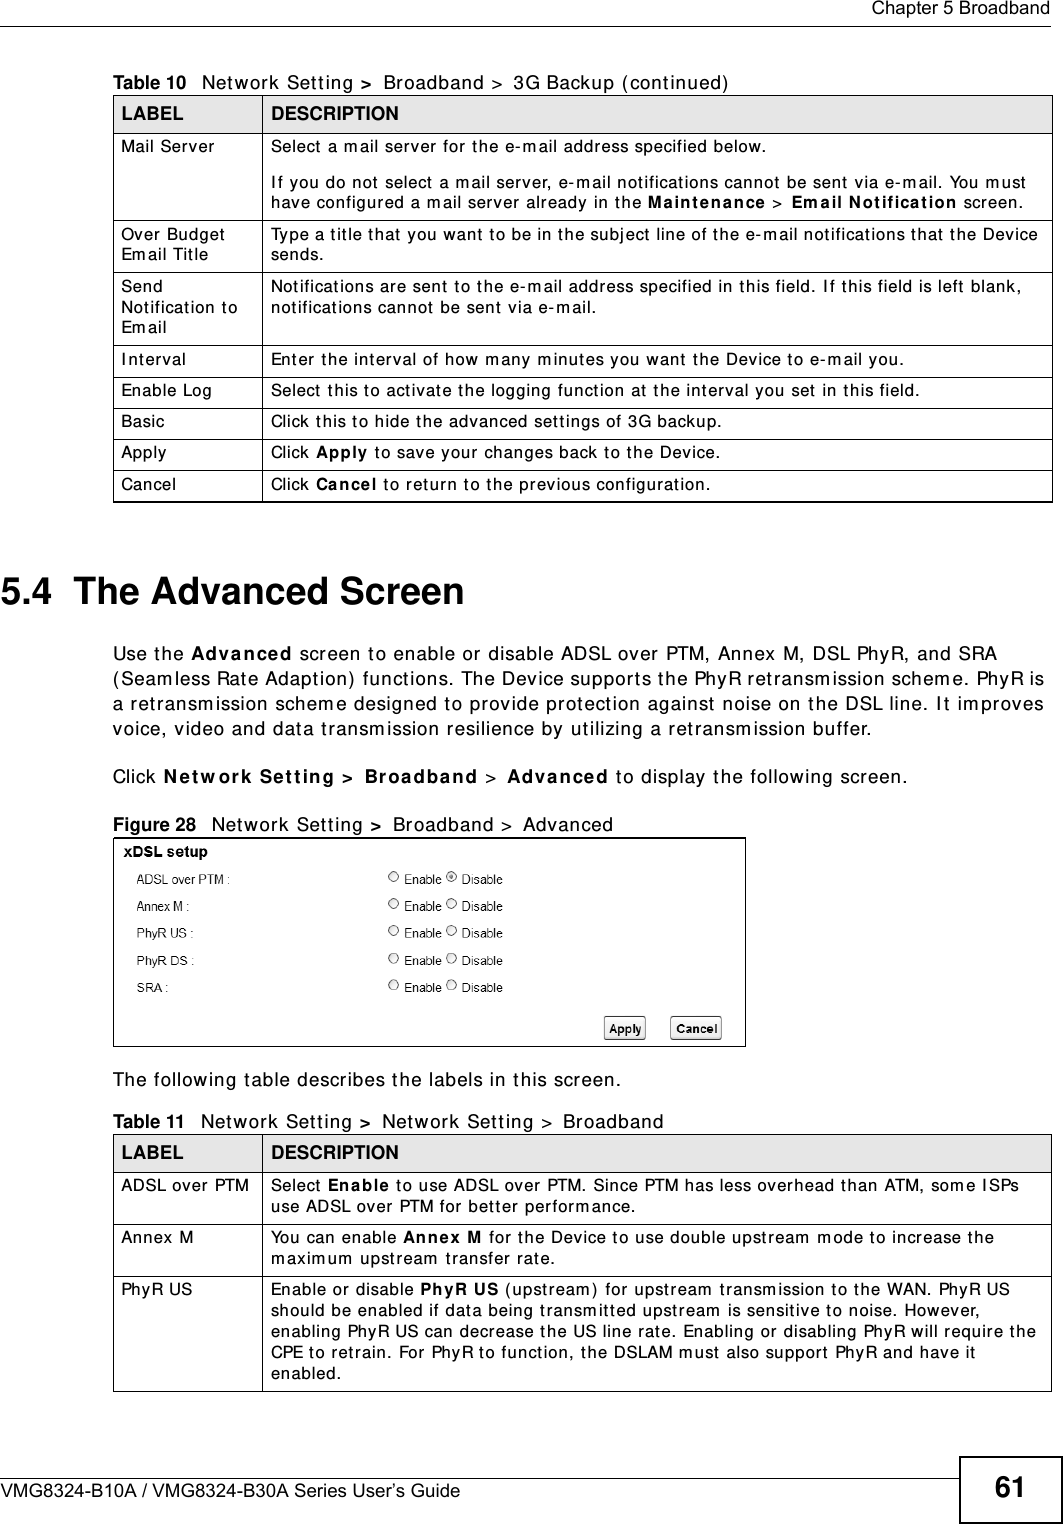  Chapter 5 BroadbandVMG8324-B10A / VMG8324-B30A Series User’s Guide 615.4  The Advanced ScreenUse t he Adva nced screen t o enable or disable ADSL over PTM, Annex M, DSL PhyR, and SRA ( Seam less Rat e Adaption)  funct ions. The Device support s the PhyR retransm ission schem e. PhyR is a ret ransm ission schem e designed t o prov ide prot ect ion against noise on t he DSL line. I t  im proves voice, video and data t ransm ission resilience by ut ilizing a retransm ission buffer.Click N et w ork  Se t t ing &gt;  Broa dband &gt;  Adva n ce d t o display t he following screen.Figure 28   Net work Set t ing &gt;  Broadband &gt;  Advanced The following t able describes t he labels in this screen. Mail Ser ver Select  a m ail server for the e- m ail address specified below. I f you do not  select  a m ail server, e-m ail not ificat ions cannot  be sent via e-m ail. You m ust  have configured a m ail server already in t he Main t e na n ce &gt; Em ail N ot ifica t ion screen.Over Budget Em ail Tit leType a t it le t hat  you want  t o be in t he subject  line of the e- m ail notificat ions t hat  t he Device sends.Send Notification t o Em ailNotificat ions are sent  t o t he e- m ail address specified in t his field. I f t his field is left  blank, not ificat ions cannot  be sent via e- m ail. I nt erval Enter t he int erval of how m any m inut es y ou want the Device to e- m ail you.Enable Log Select this to act ivate the logging funct ion at the int erval you set  in this field. Basic Click t his t o hide t he advanced settings of 3G backup.Apply Click Apply t o save your changes back t o t he Device.Cancel Click Ca nce l to ret urn to t he previous configurat ion.Table 10   Net work Sett ing &gt;  Broadband &gt;  3G Backup ( cont inued)LABEL DESCRIPTIONTable 11   Net work Set t ing &gt;  Net work Set t ing &gt;  BroadbandLABEL DESCRIPTIONADSL over PTM Select  Ena ble  t o use ADSL over PTM. Since PTM has less overhead than ATM, som e I SPs use ADSL over  PTM for bet t er  perfor m ance.Annex  M You can enable Ann ex M  for t he Device t o use double upst ream  m ode to increase t he m axim um  upst ream  t ransfer rat e.PhyR US Enable or disable Ph yR US ( upst r eam )  for upst ream  t ransm ission t o the WAN. PhyR US should be enabled if dat a being transm itted upstream  is sensitive to noise. However, enabling PhyR US can decrease t he US line rat e. Enabling or disabling PhyR will require the CPE to ret rain. For PhyR t o function, the DSLAM m ust  also support  PhyR and have it  enabled.